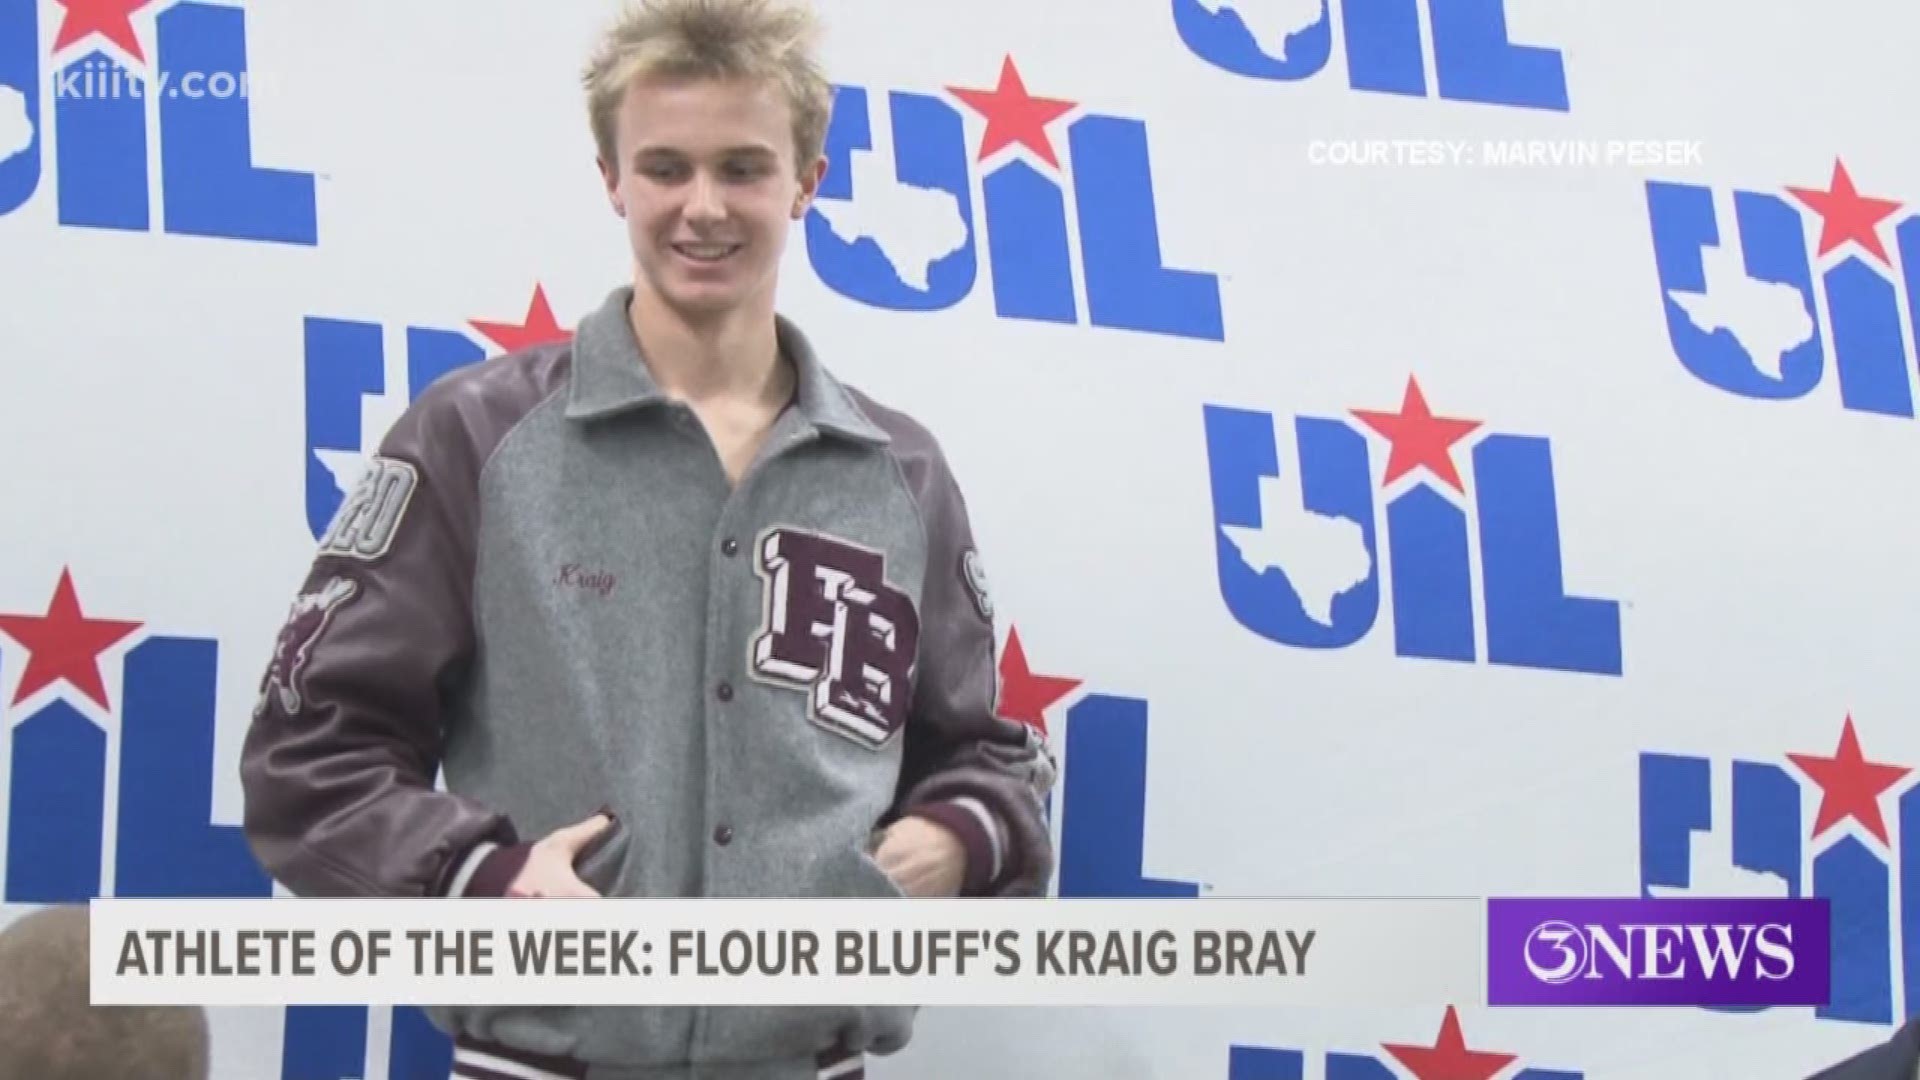 Flour Bluff's gold medal winning swimmer Kraig Bray is our 3News Athlete of the Week!